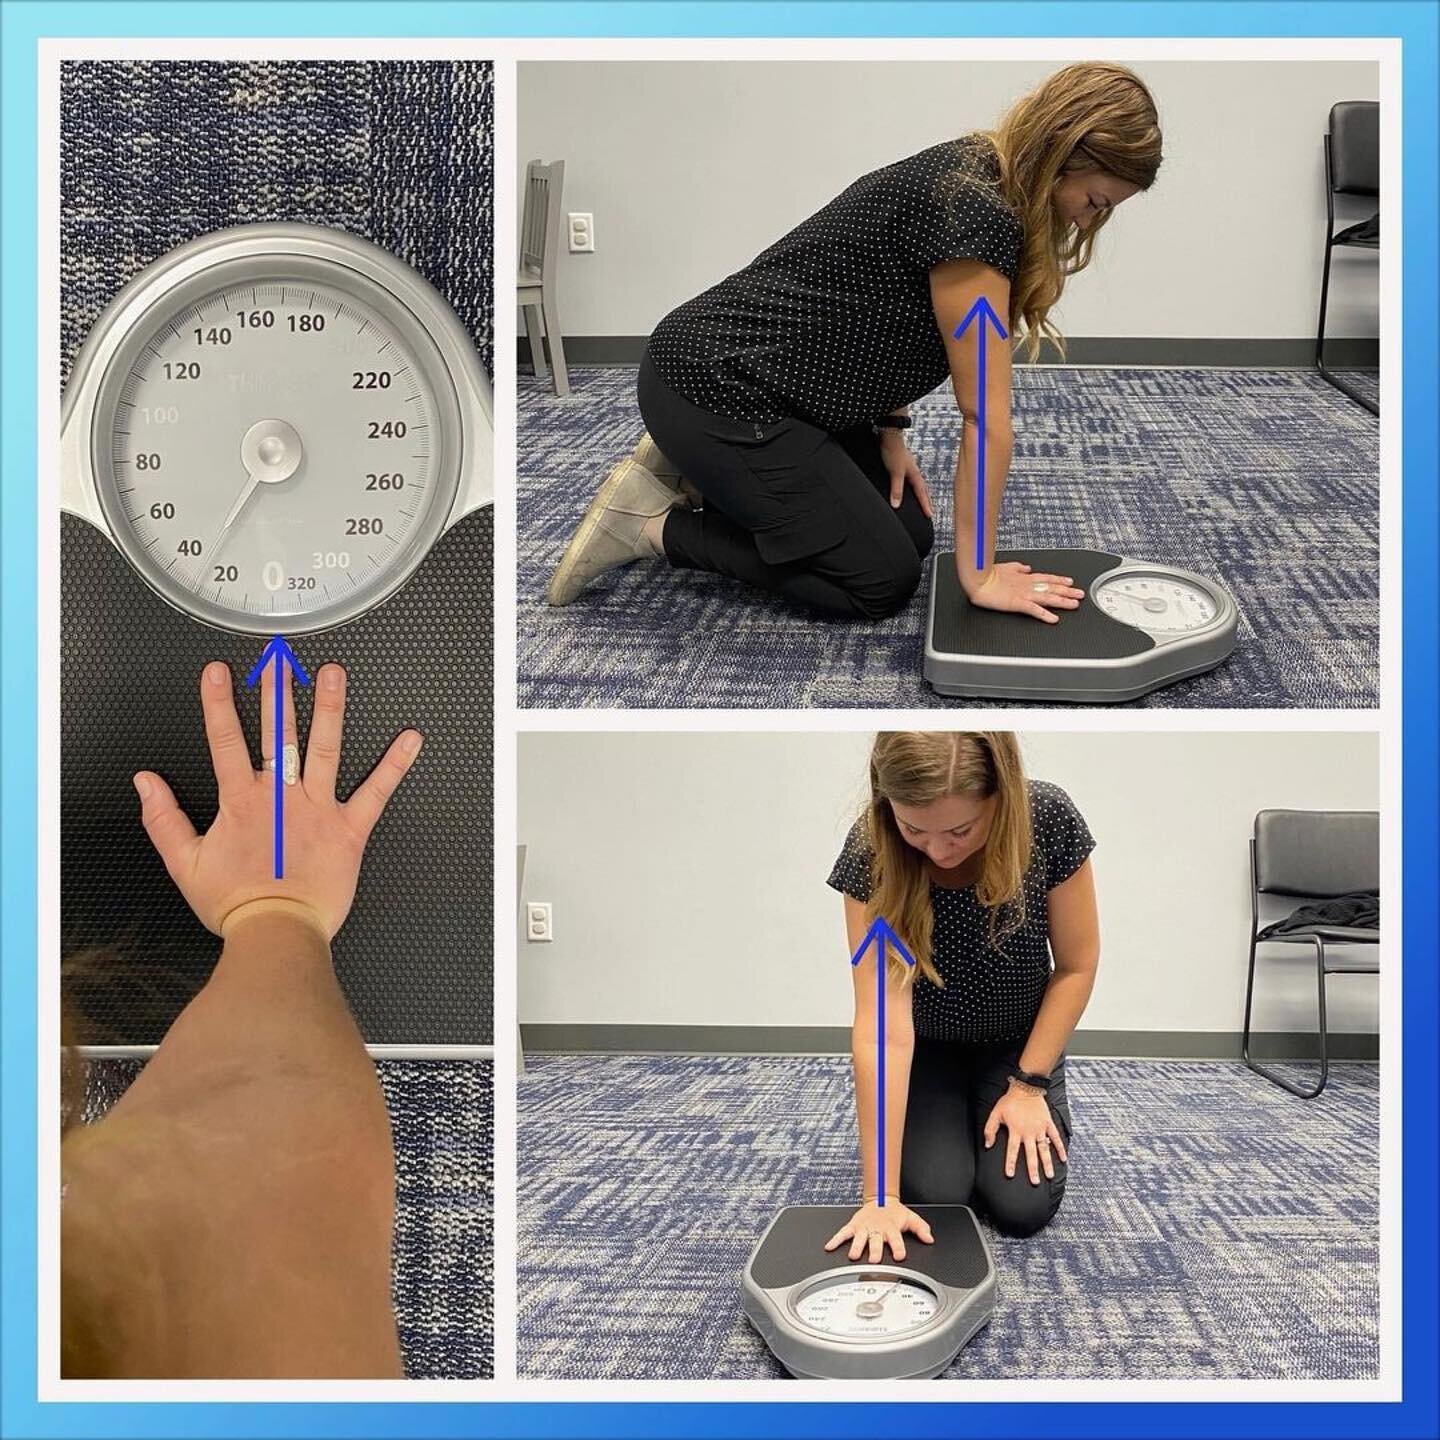 Thanks to our friends @handtherapyacademy for this excellent post on the weight bearing test for TFCC injuries and ulnar sided wrist pain 👏🏼✊🏻🙌🏻 #Repost @handtherapyacademy
・・・
TFCC Testing 💪🖐 
.
The wrist weight bearing test is a great way to